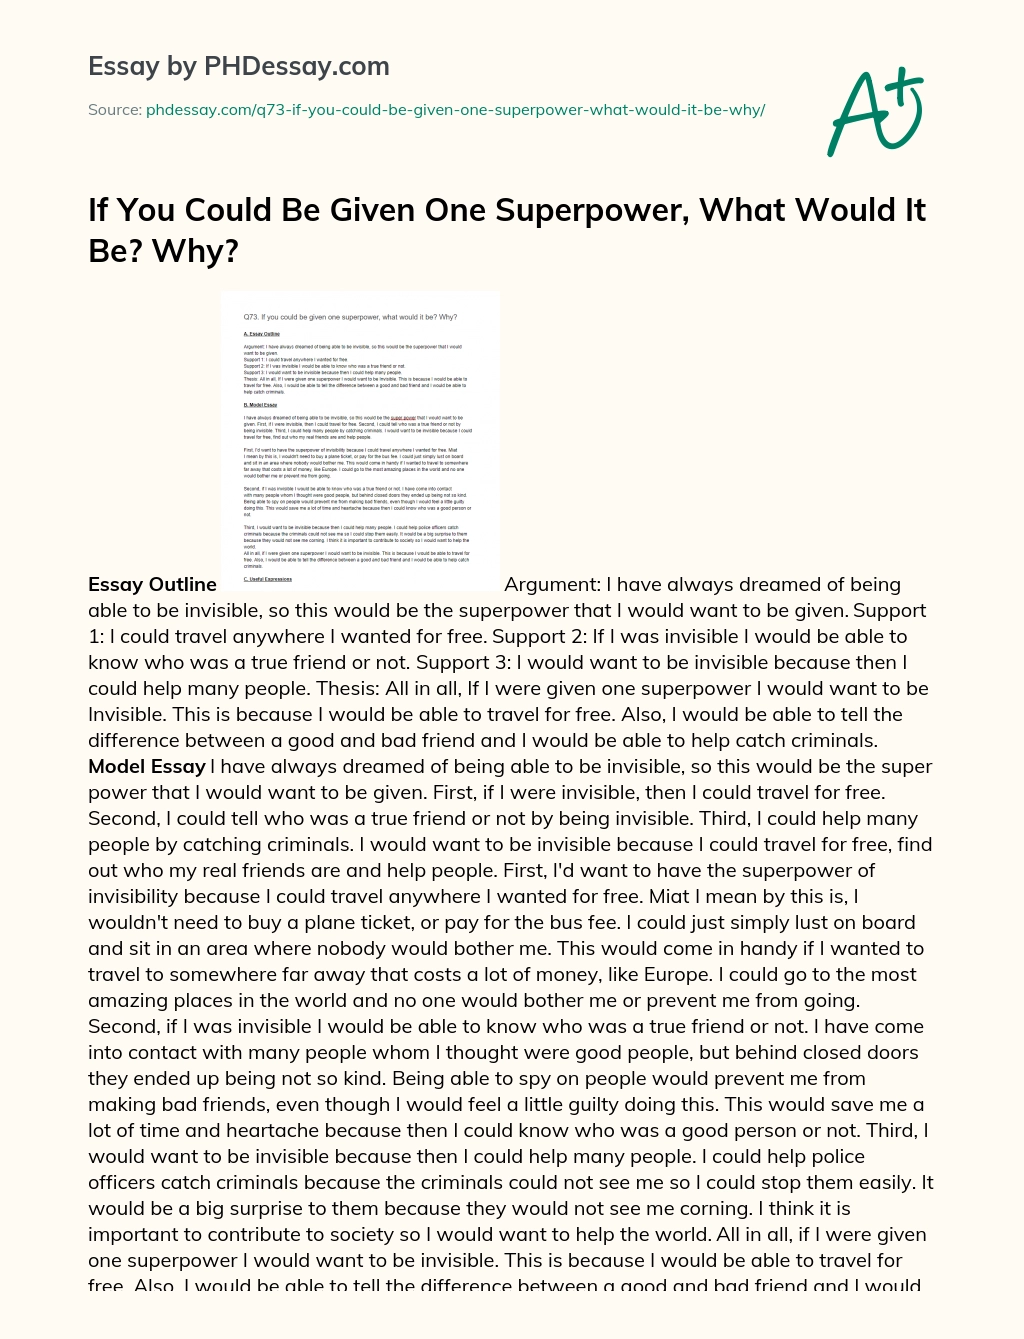 If You Could Be Given One Superpower, What Would It Be? Why? essay